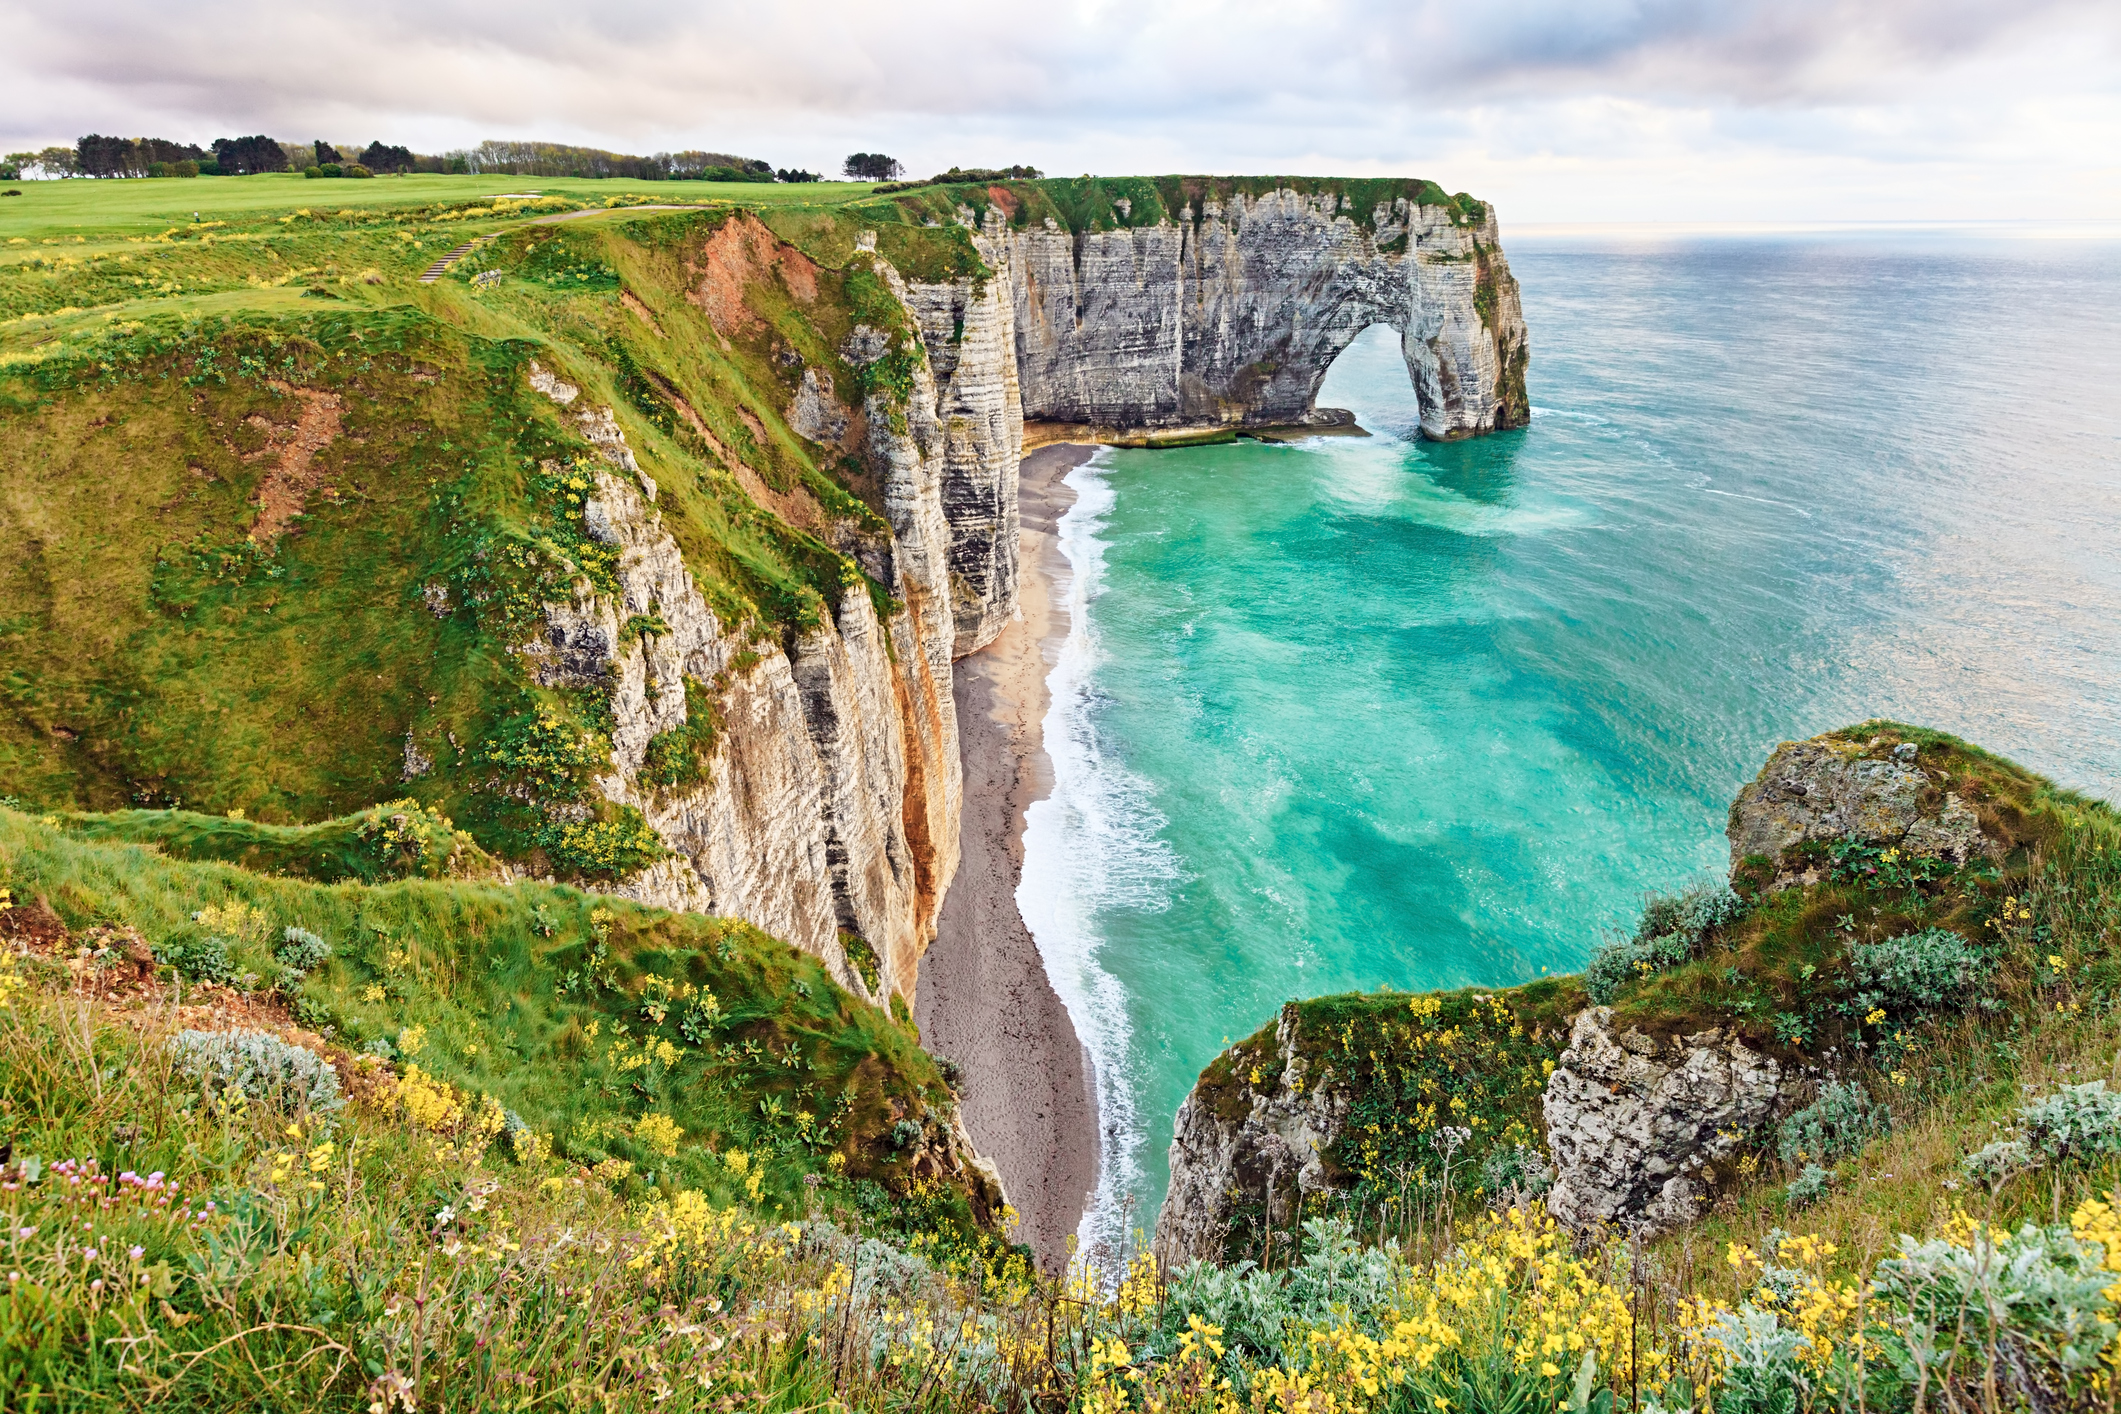 France, Normandy Region – Study on business tourism